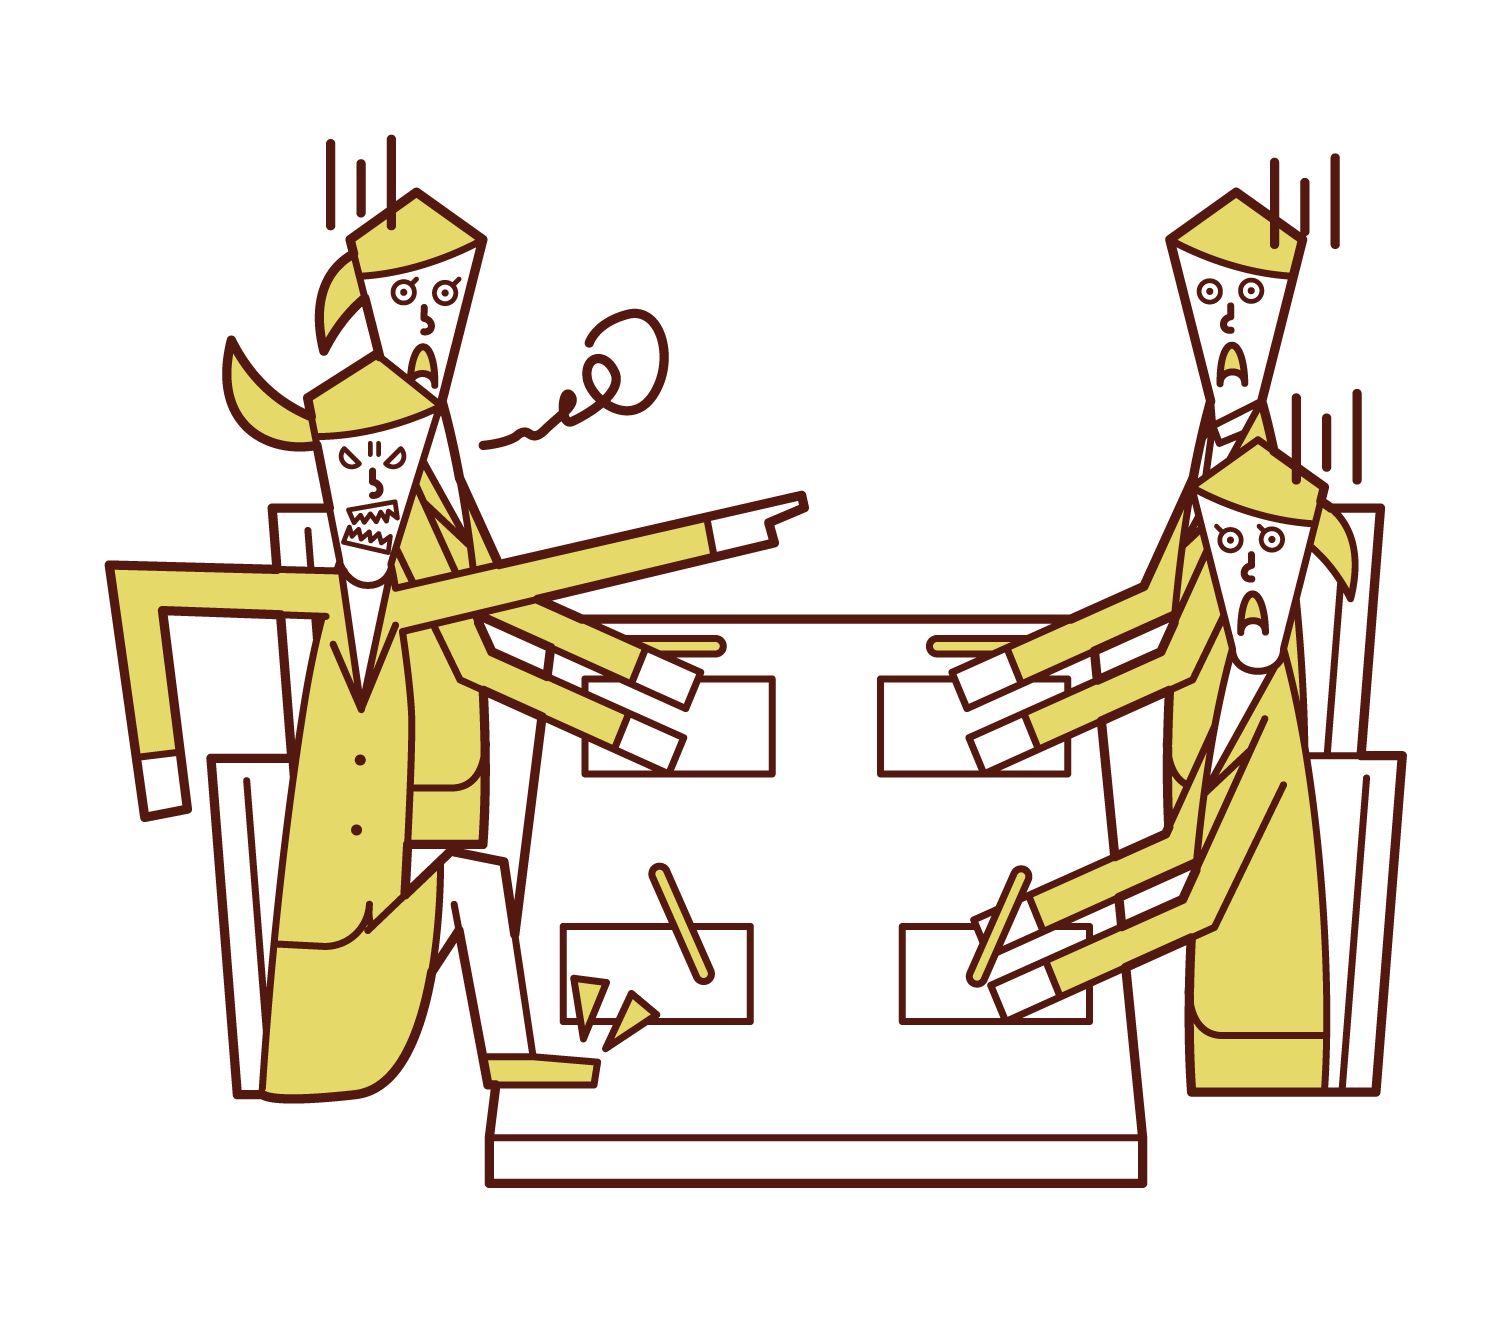 Illustration of a person (woman) who gets angry at a meeting